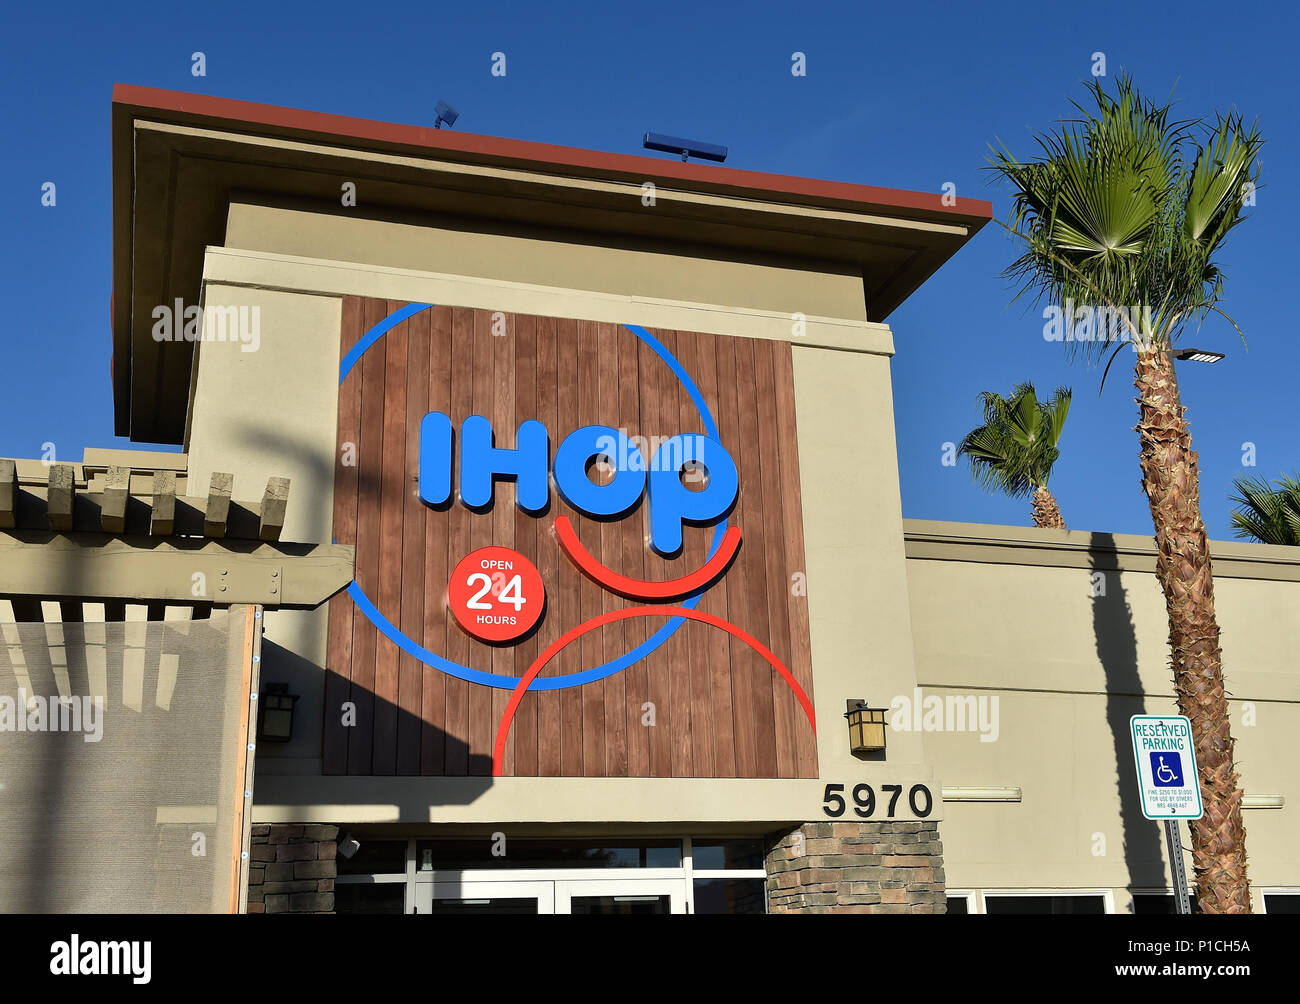 Las Vegas, Nevada, USA. 11th June, 2018. The sign for an IHOP restaurant is seen in Las Vegas. The International House of Pancakes created a marketing campaign suggesting it was going to change its name to IHOb. The restaurant chain was using the promotion to announce they were adding new hamburgers to the menu, said Darren Rebelez, president of IHOP. ''We want to convey that we are taking our burgers as seriously as our pancakes. Credit: David Becker/ZUMA Wire/Alamy Live News Stock Photo